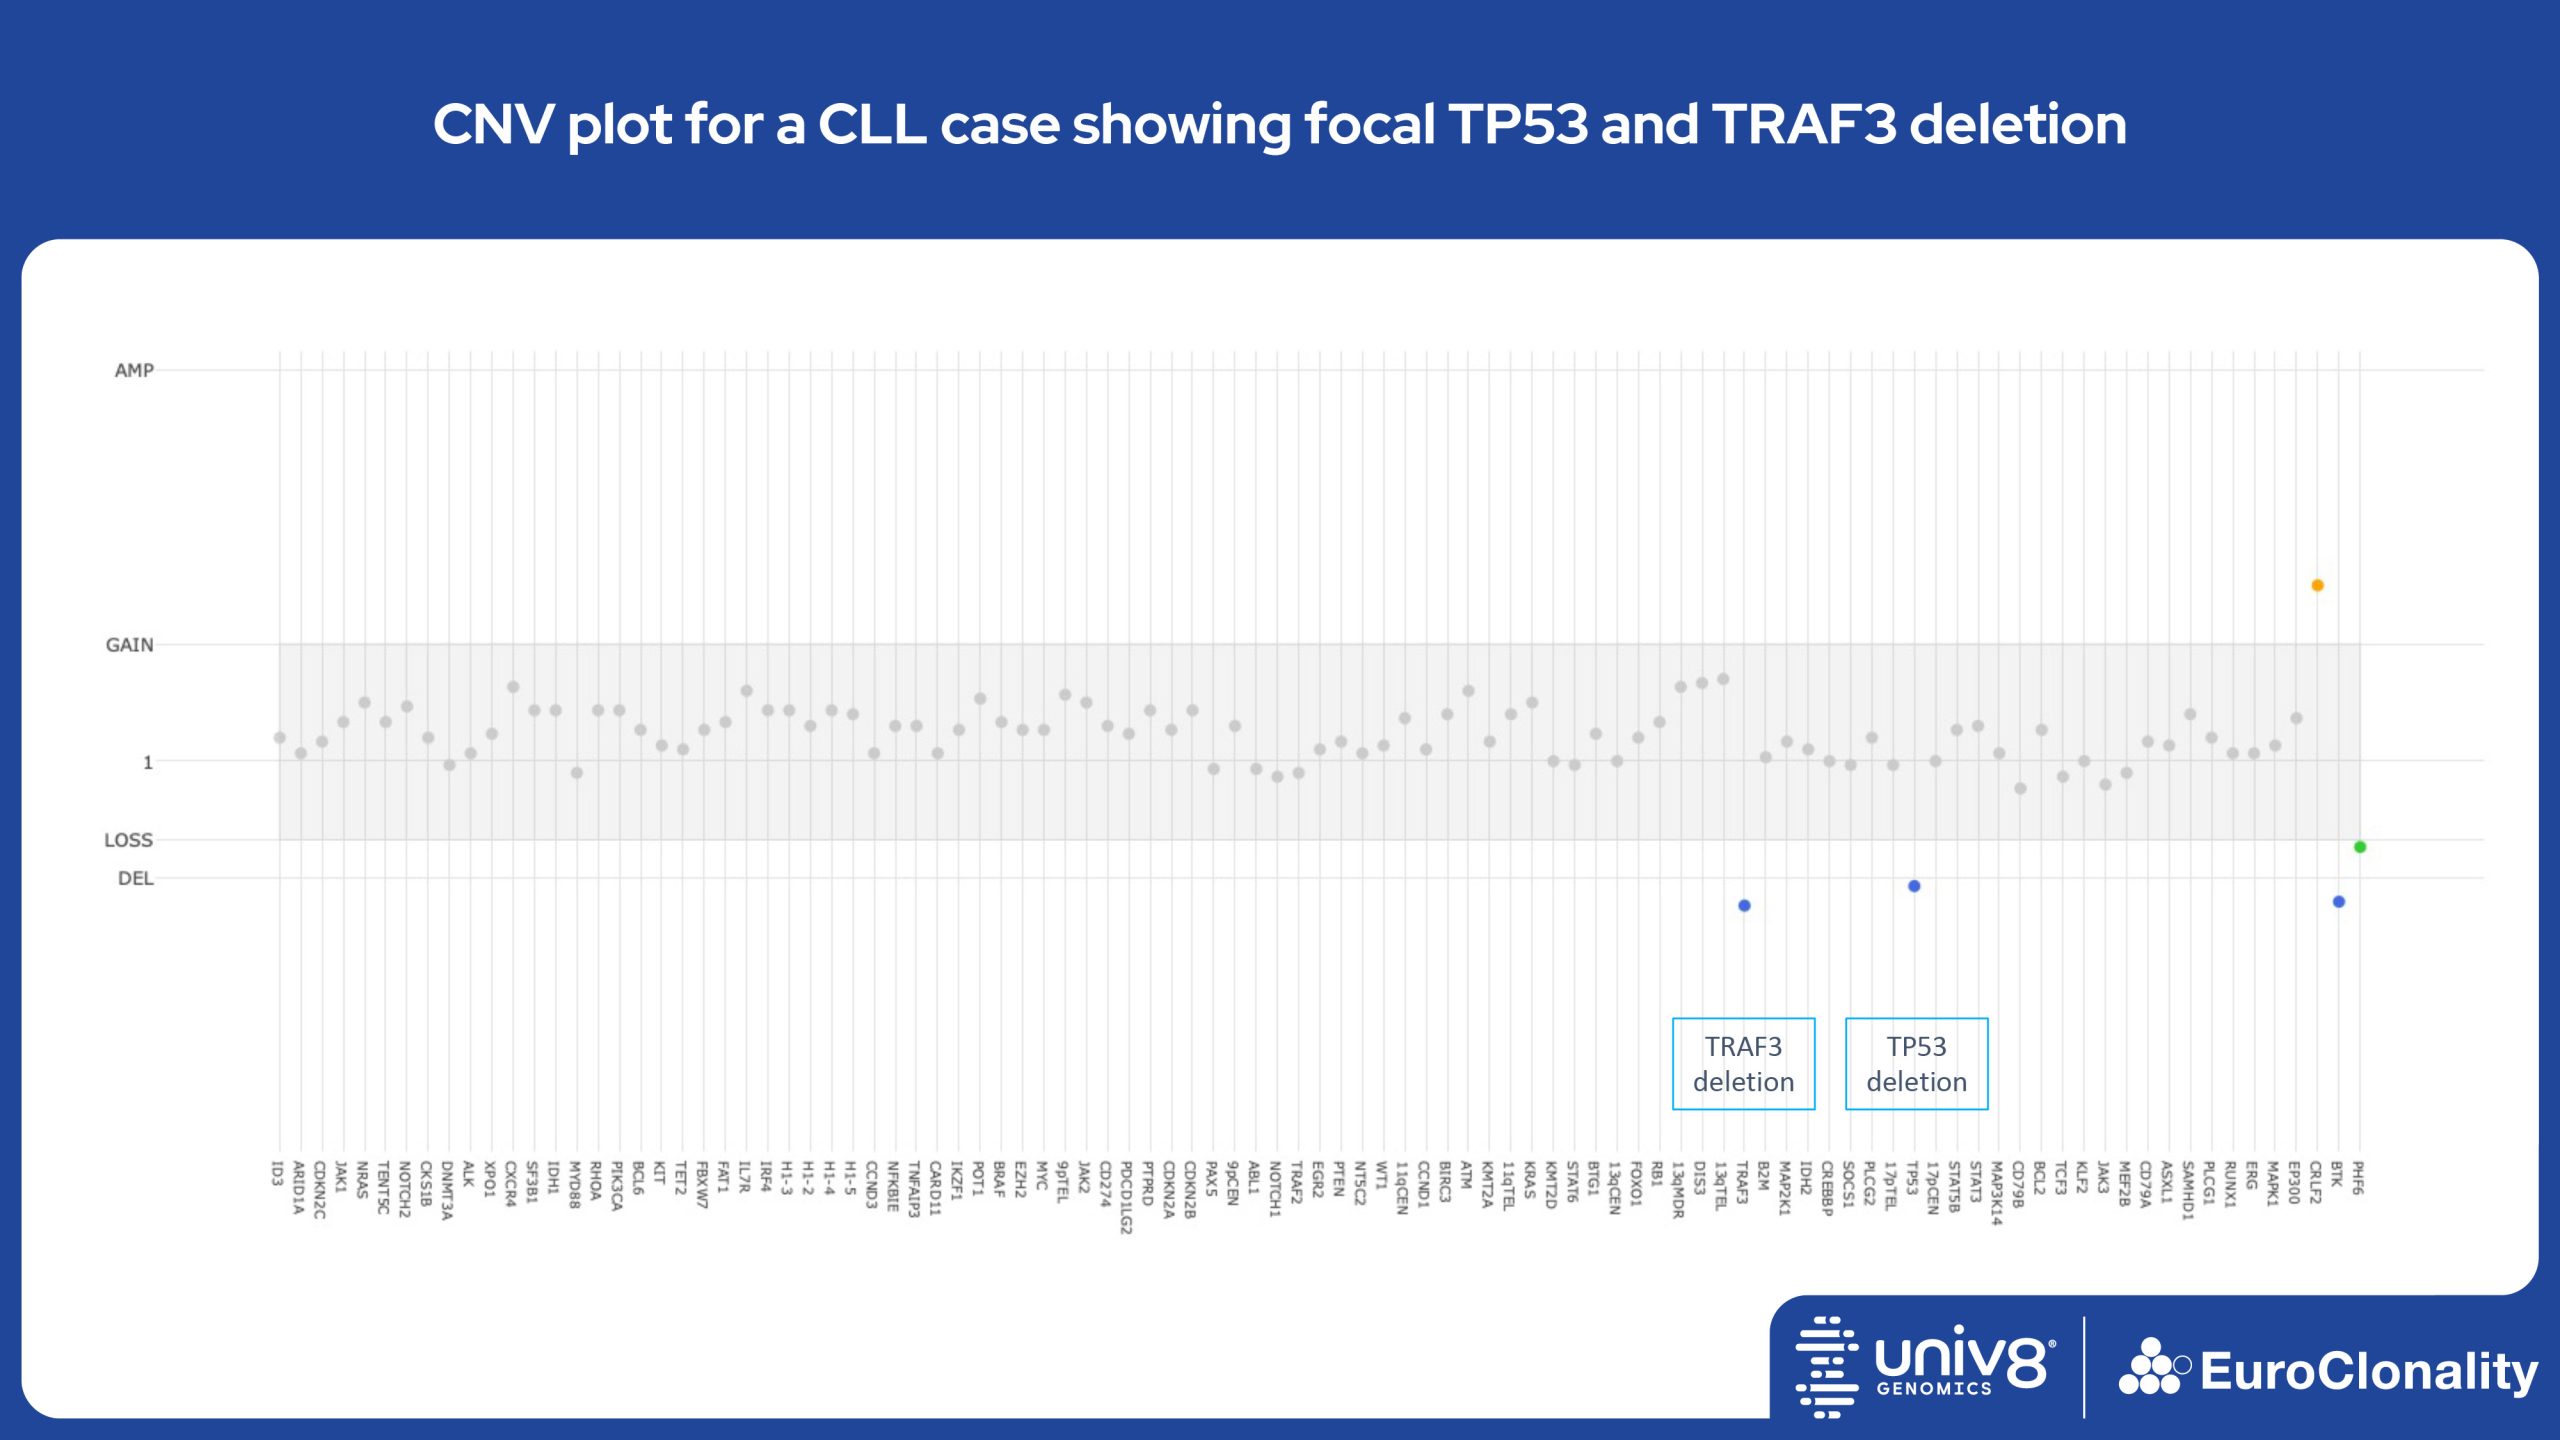 CNV plot for a CLL case showing focal TP53 and TRAF3 deletion